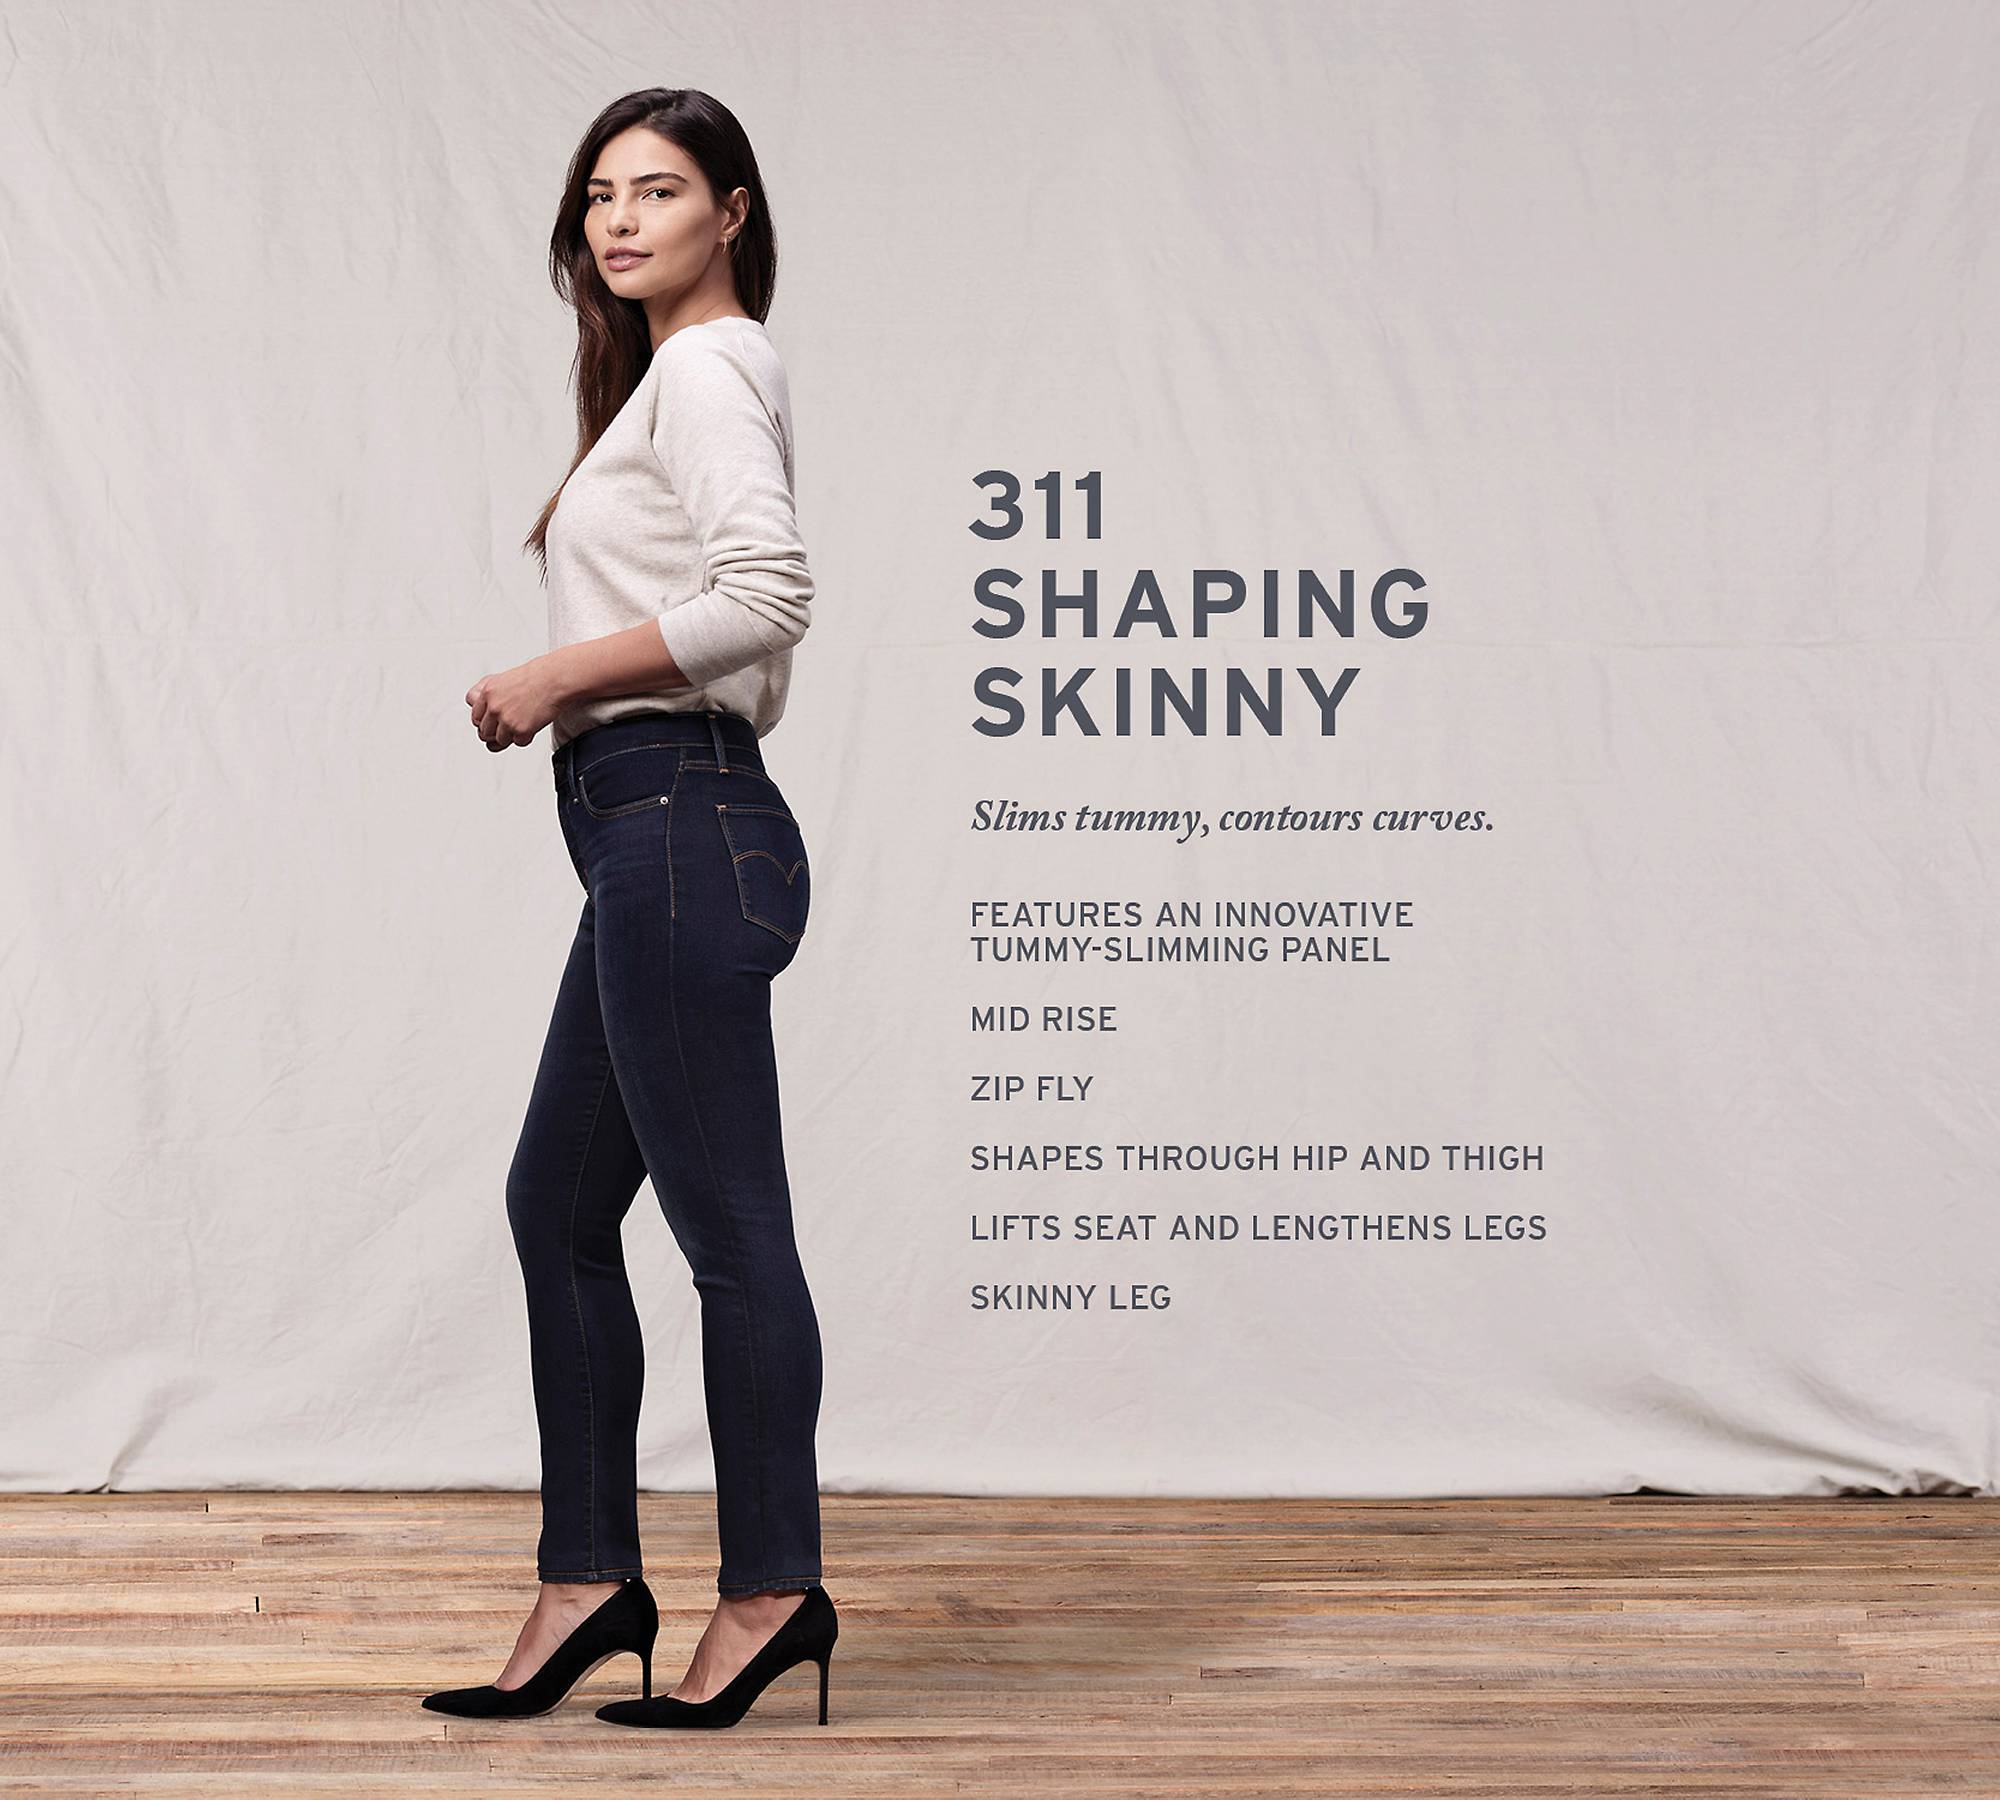 311 Shaping Skinny Twill Women's Jeans - Brown | Levi's® US